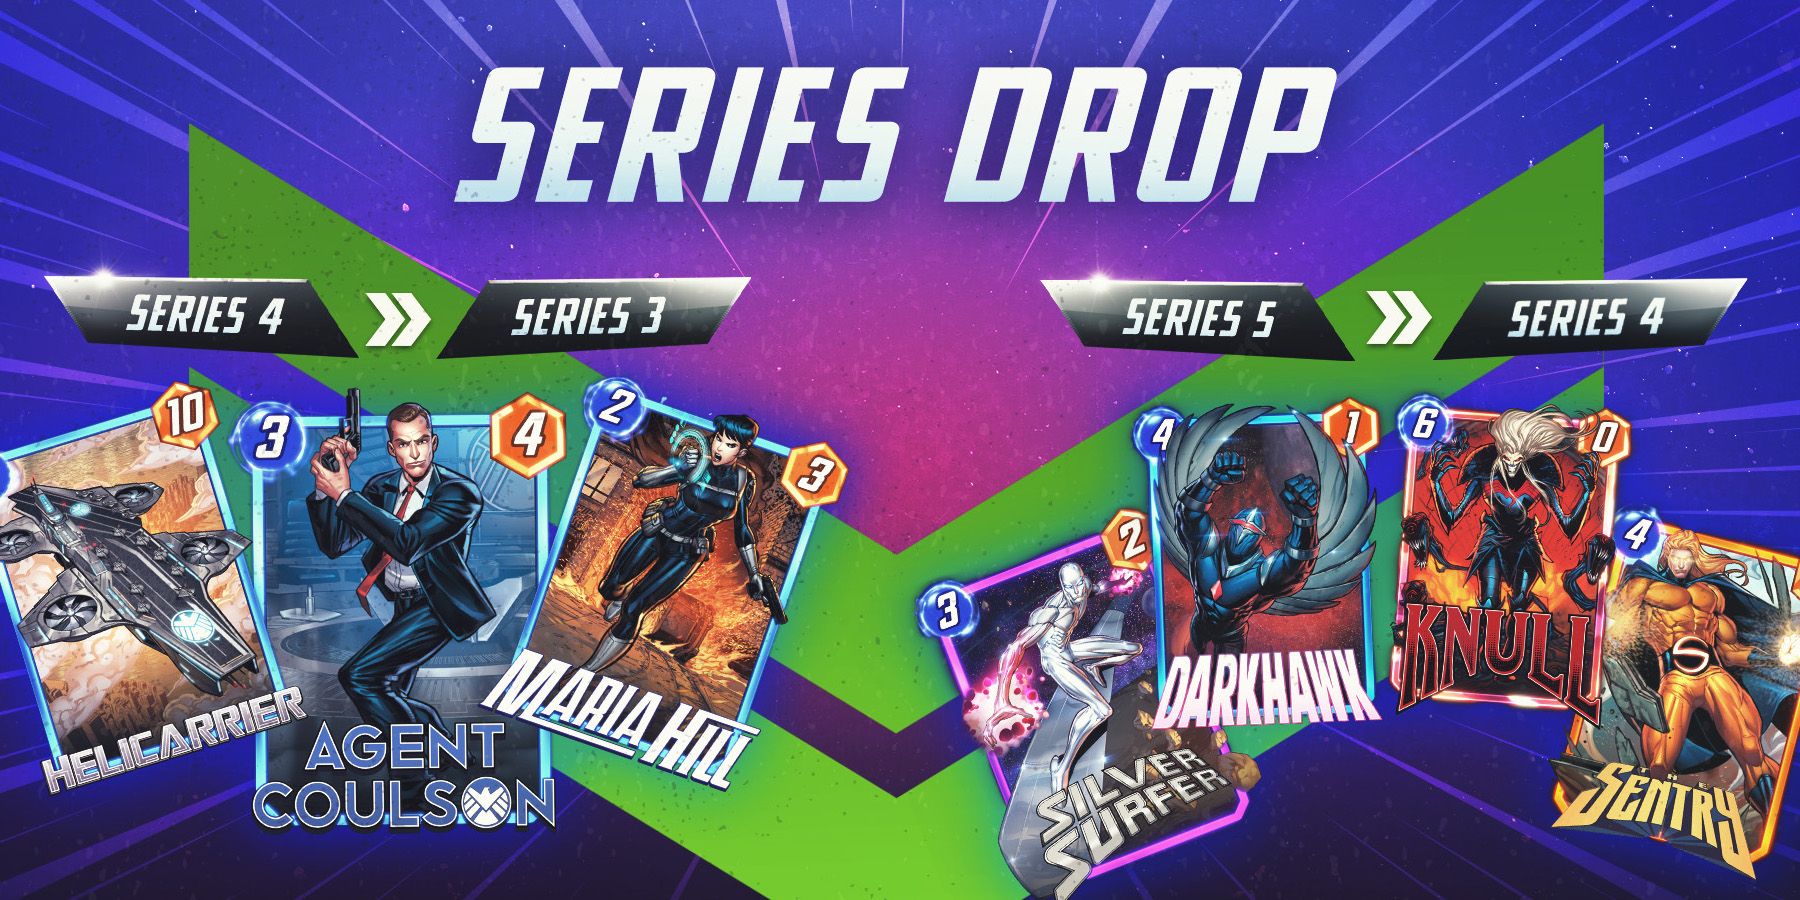 Marvel Snap refreshes its pool 3 and pool 4 with new cards - Esportschimp